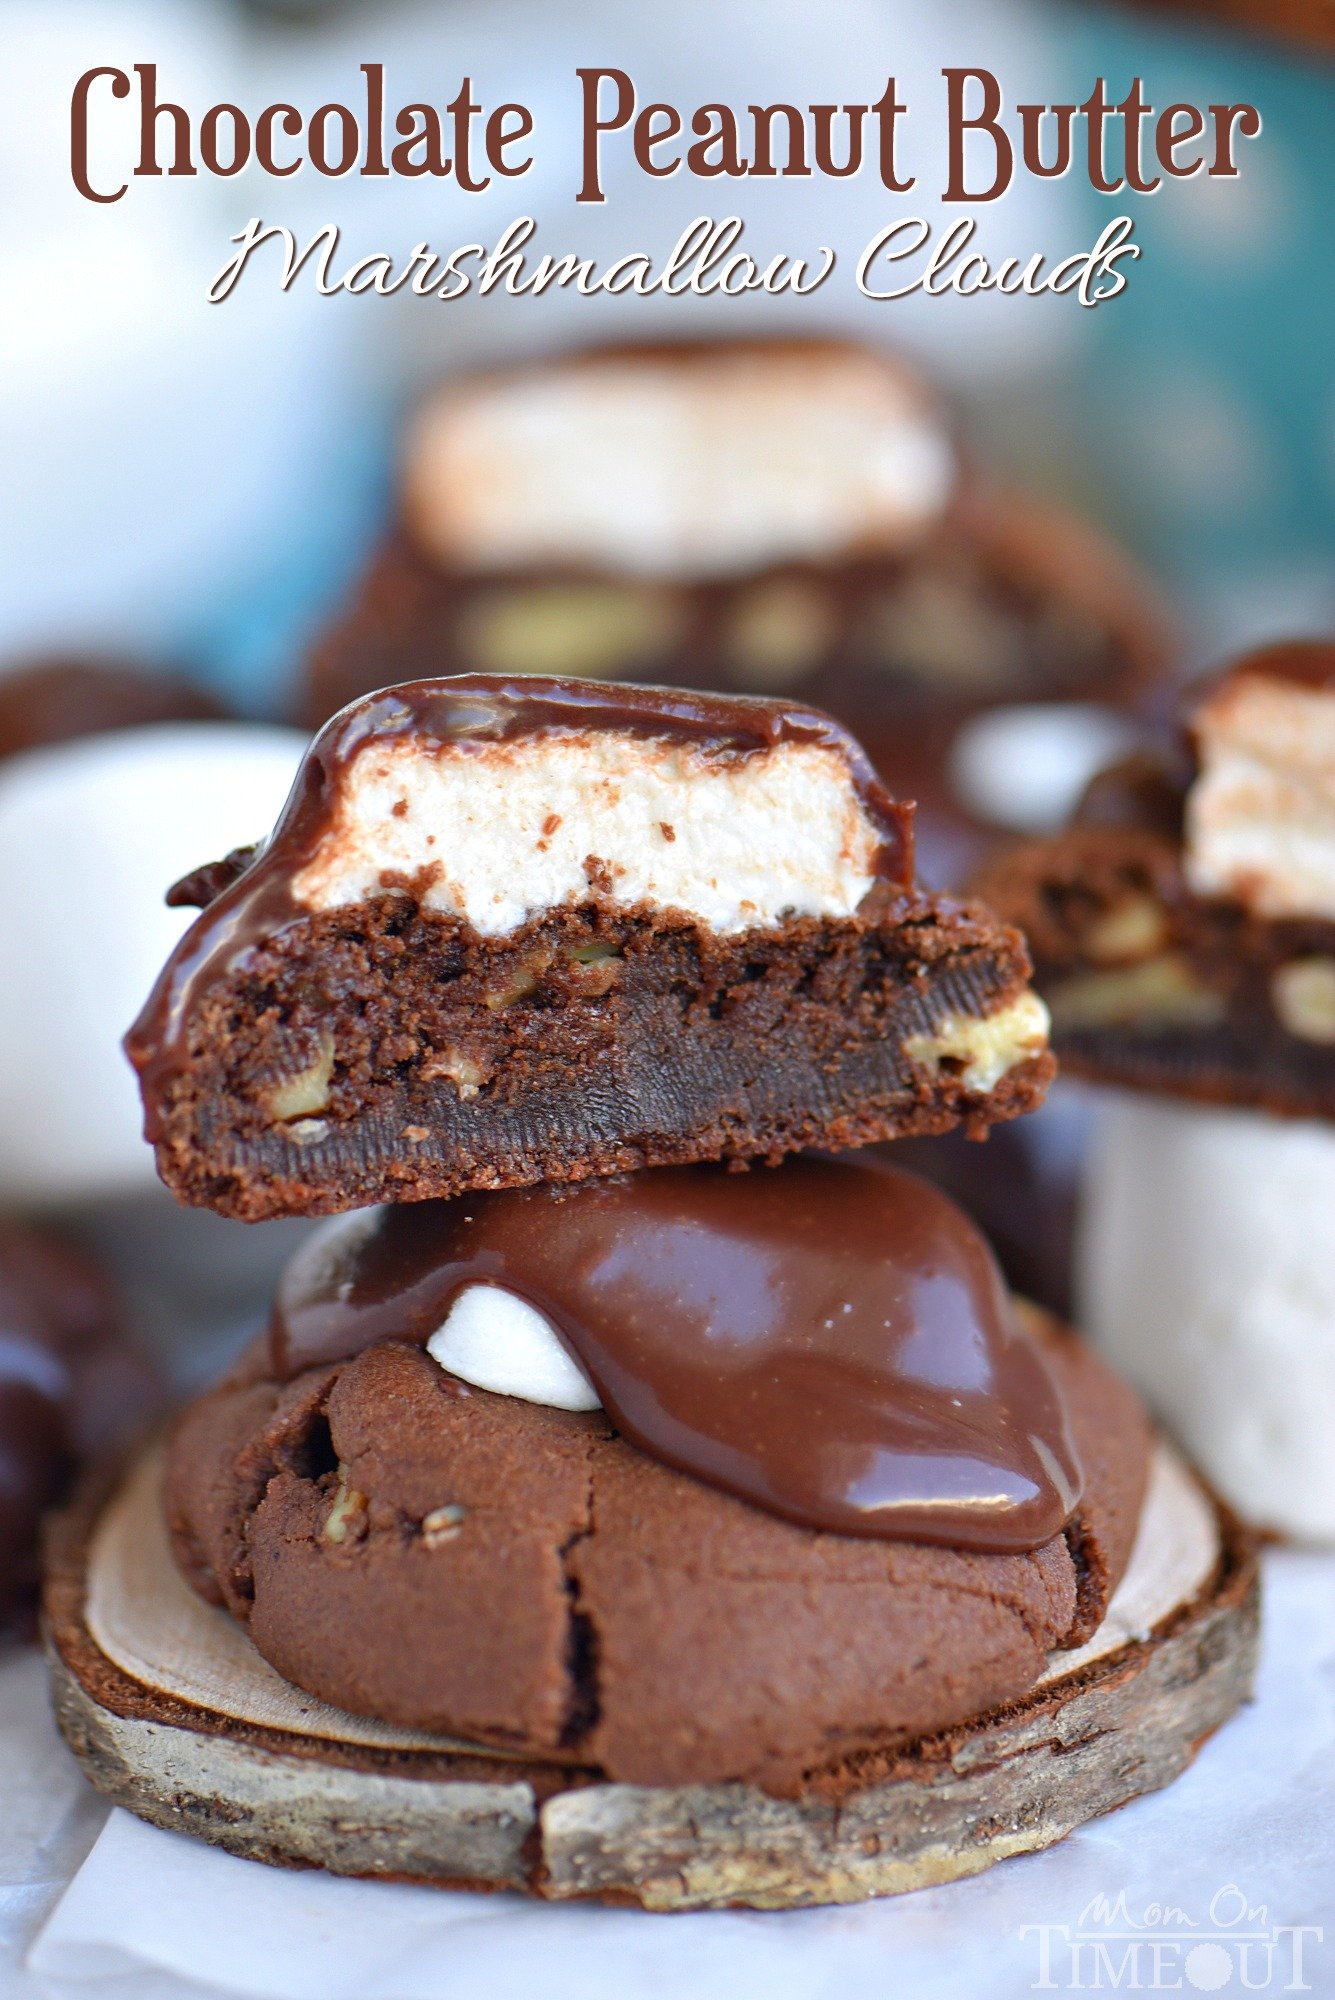 Chocolate peanut butter marshmallow clouds